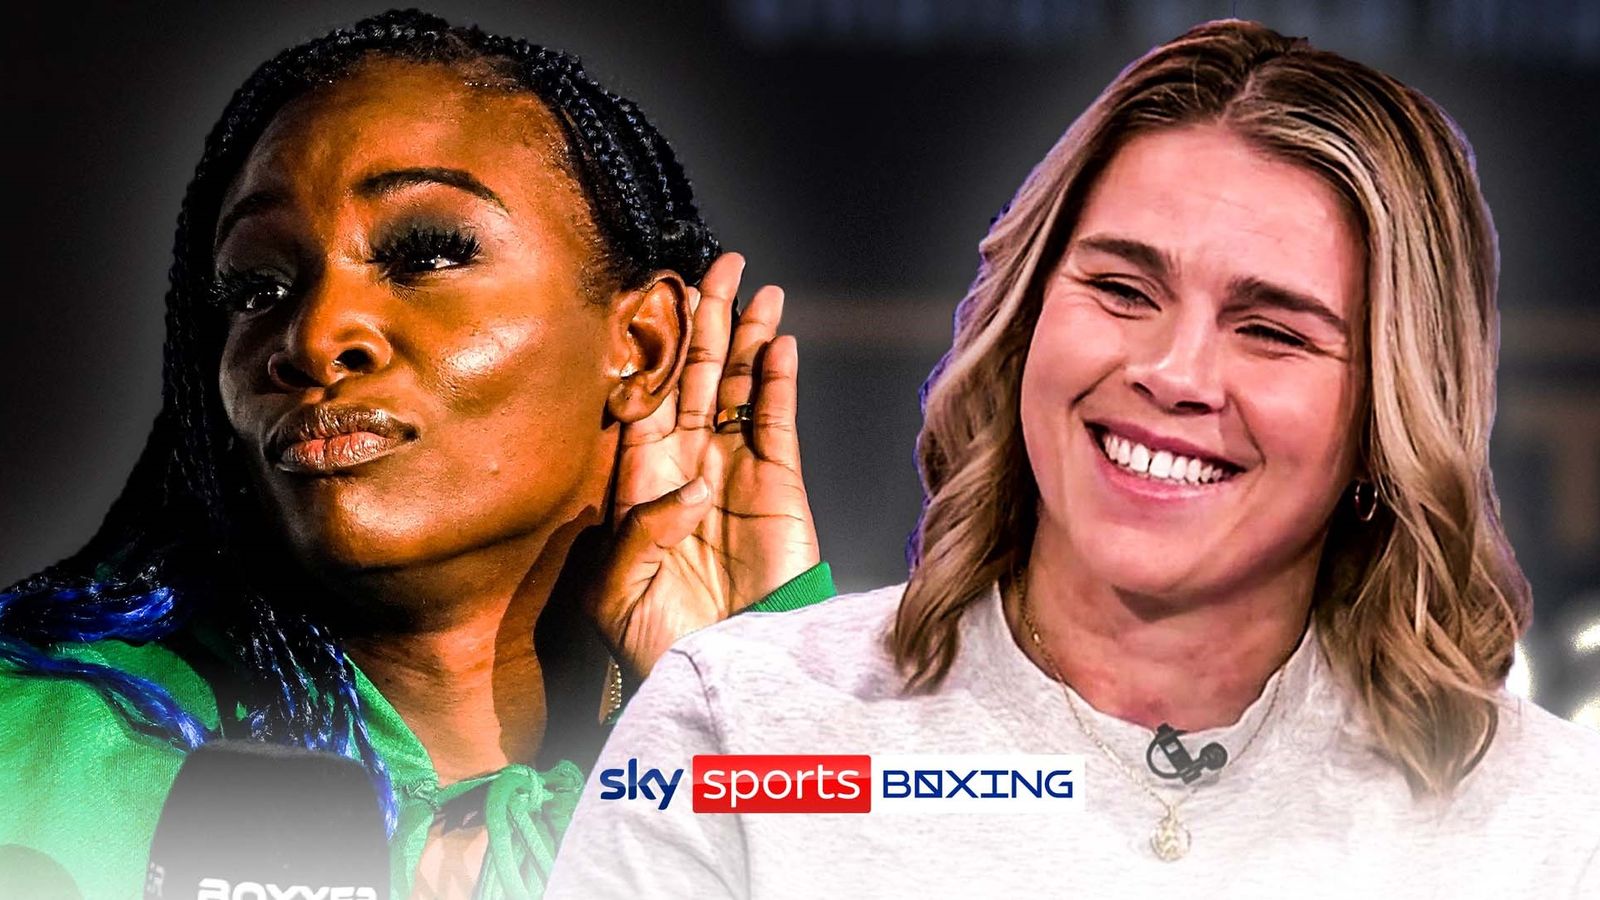 Savannah Marshall gunning for Claressa Shields rematch: ‘She needs me just as much as I need her’